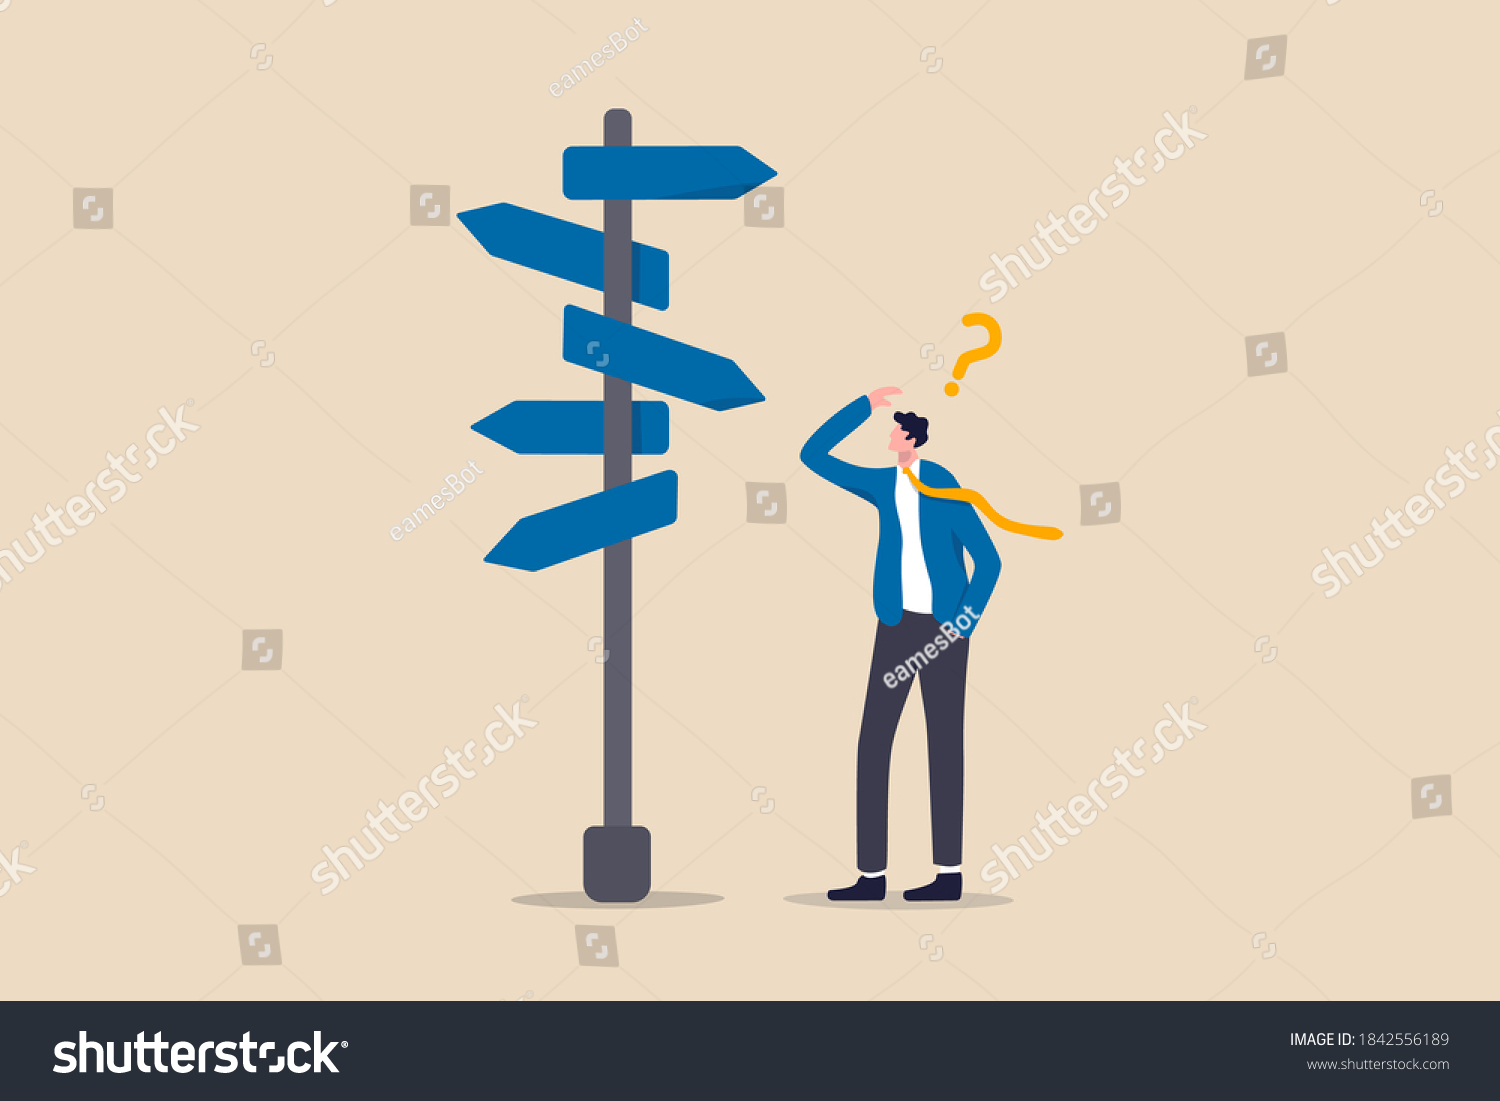 SVG of Business decision making, career path, work direction or choose the right way to success concept, confusing businessman looking at multiple road sign with question mark and thinking which way to go. svg